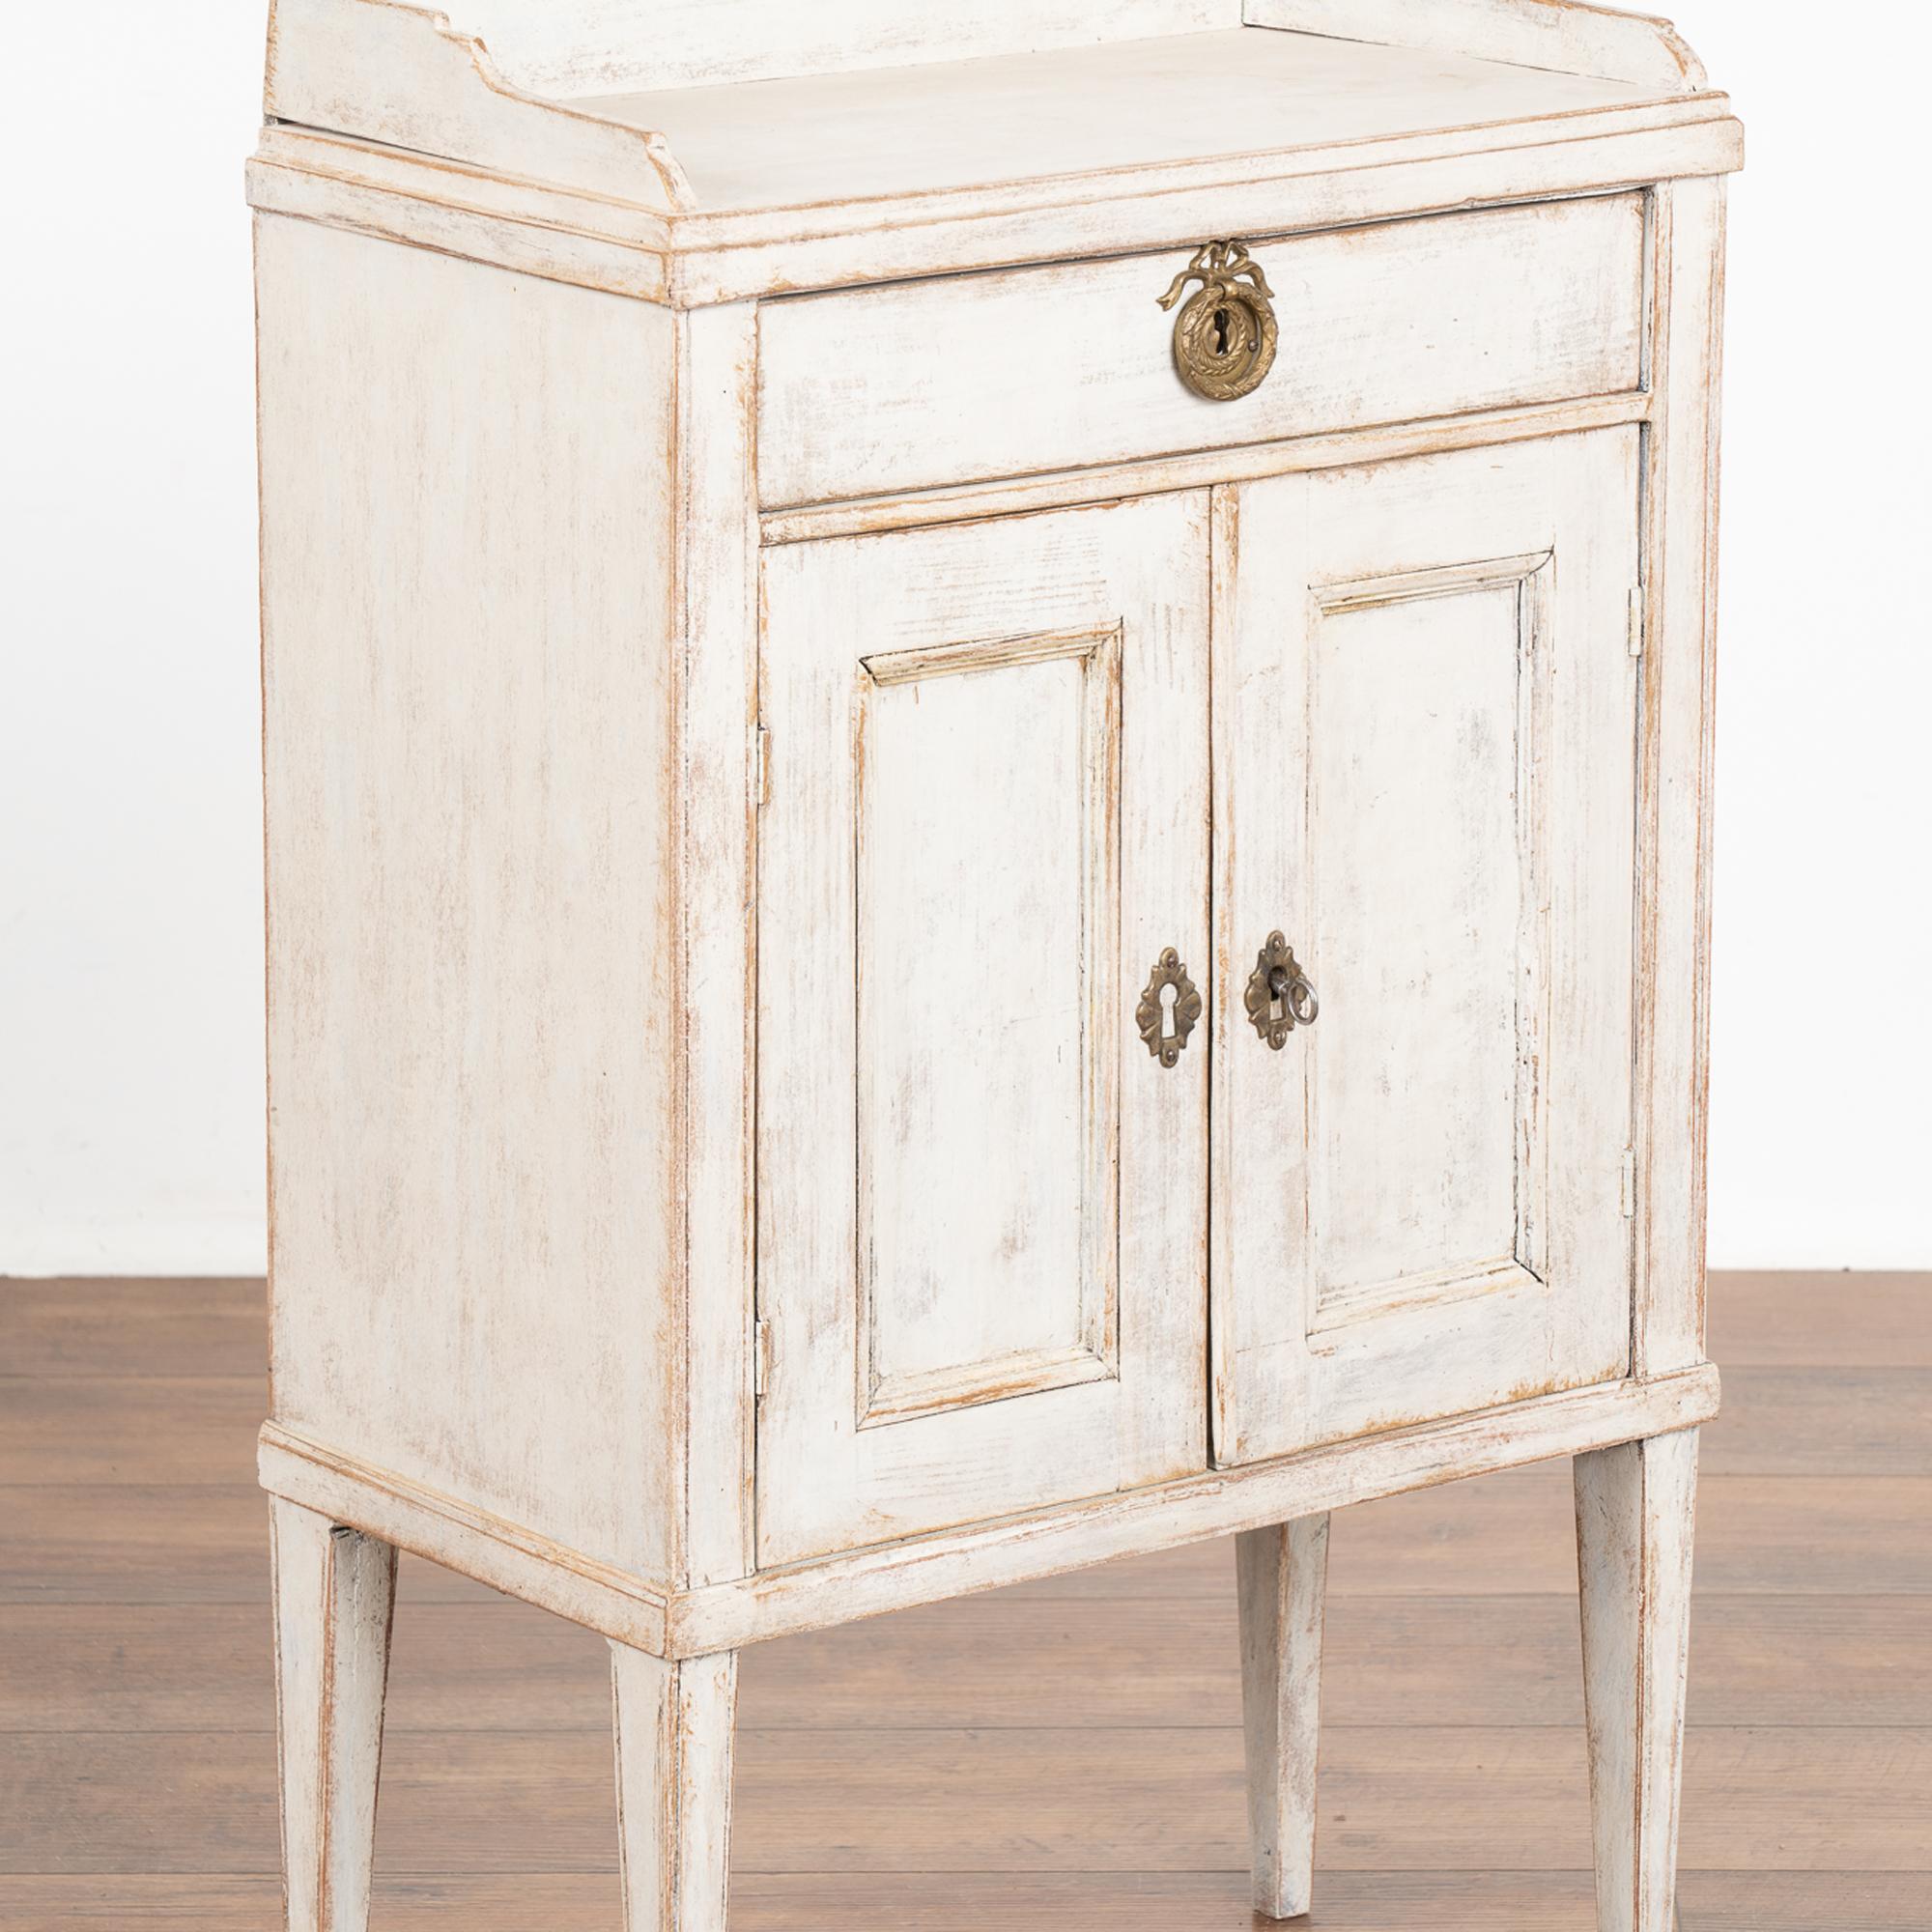 Pine White Small Cabinet, Side Table Sweden circa 1820-40